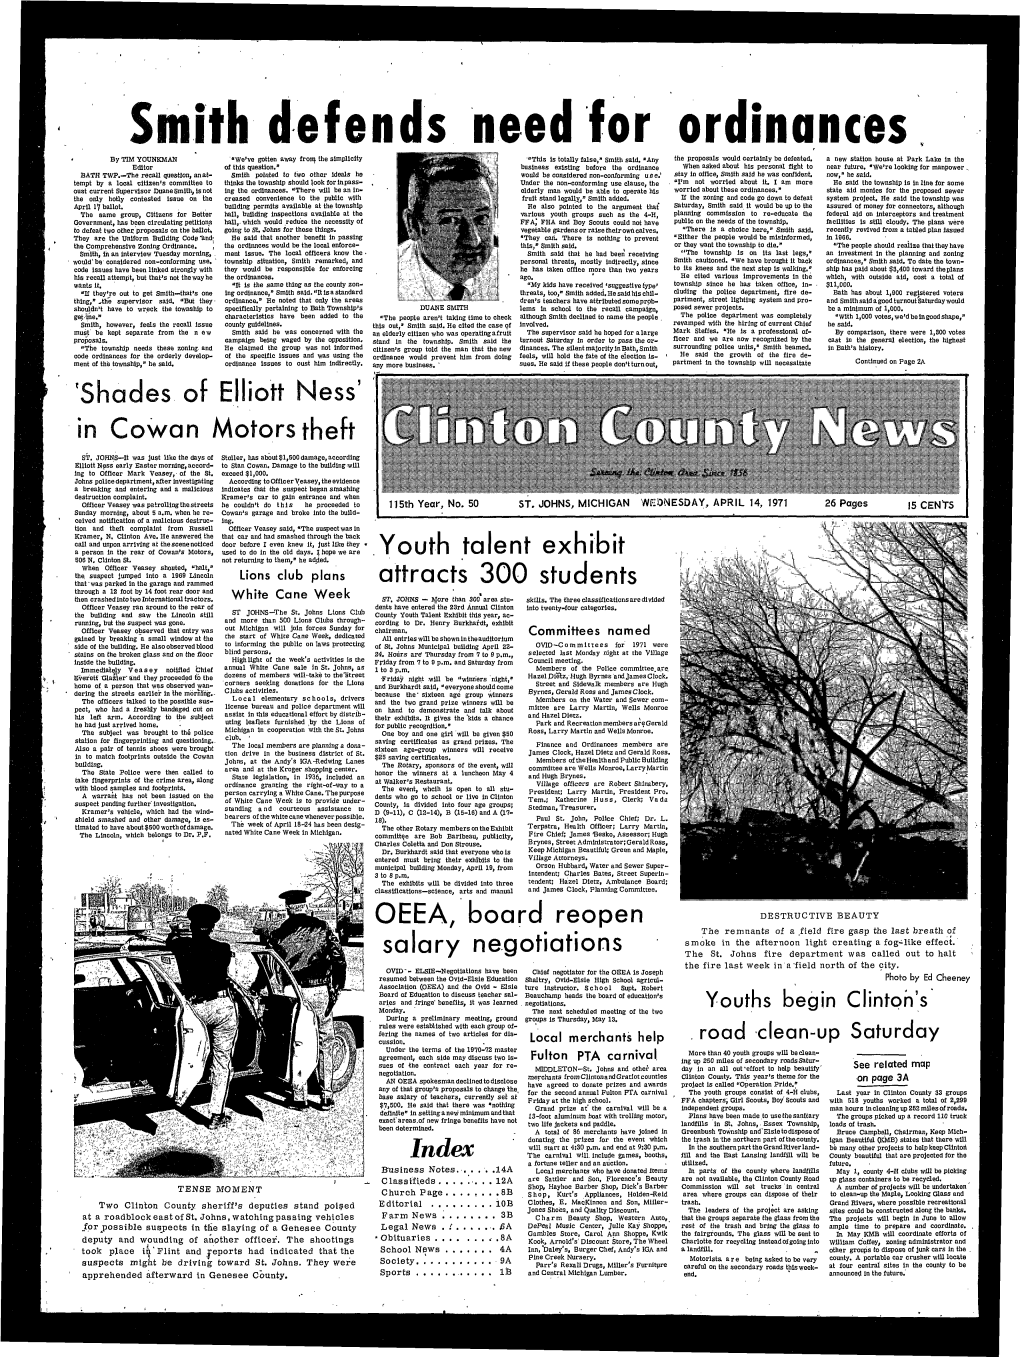 APRIL 14, 1971 26 Pages 15 CENYS Sunday Morning, About 5 A.M